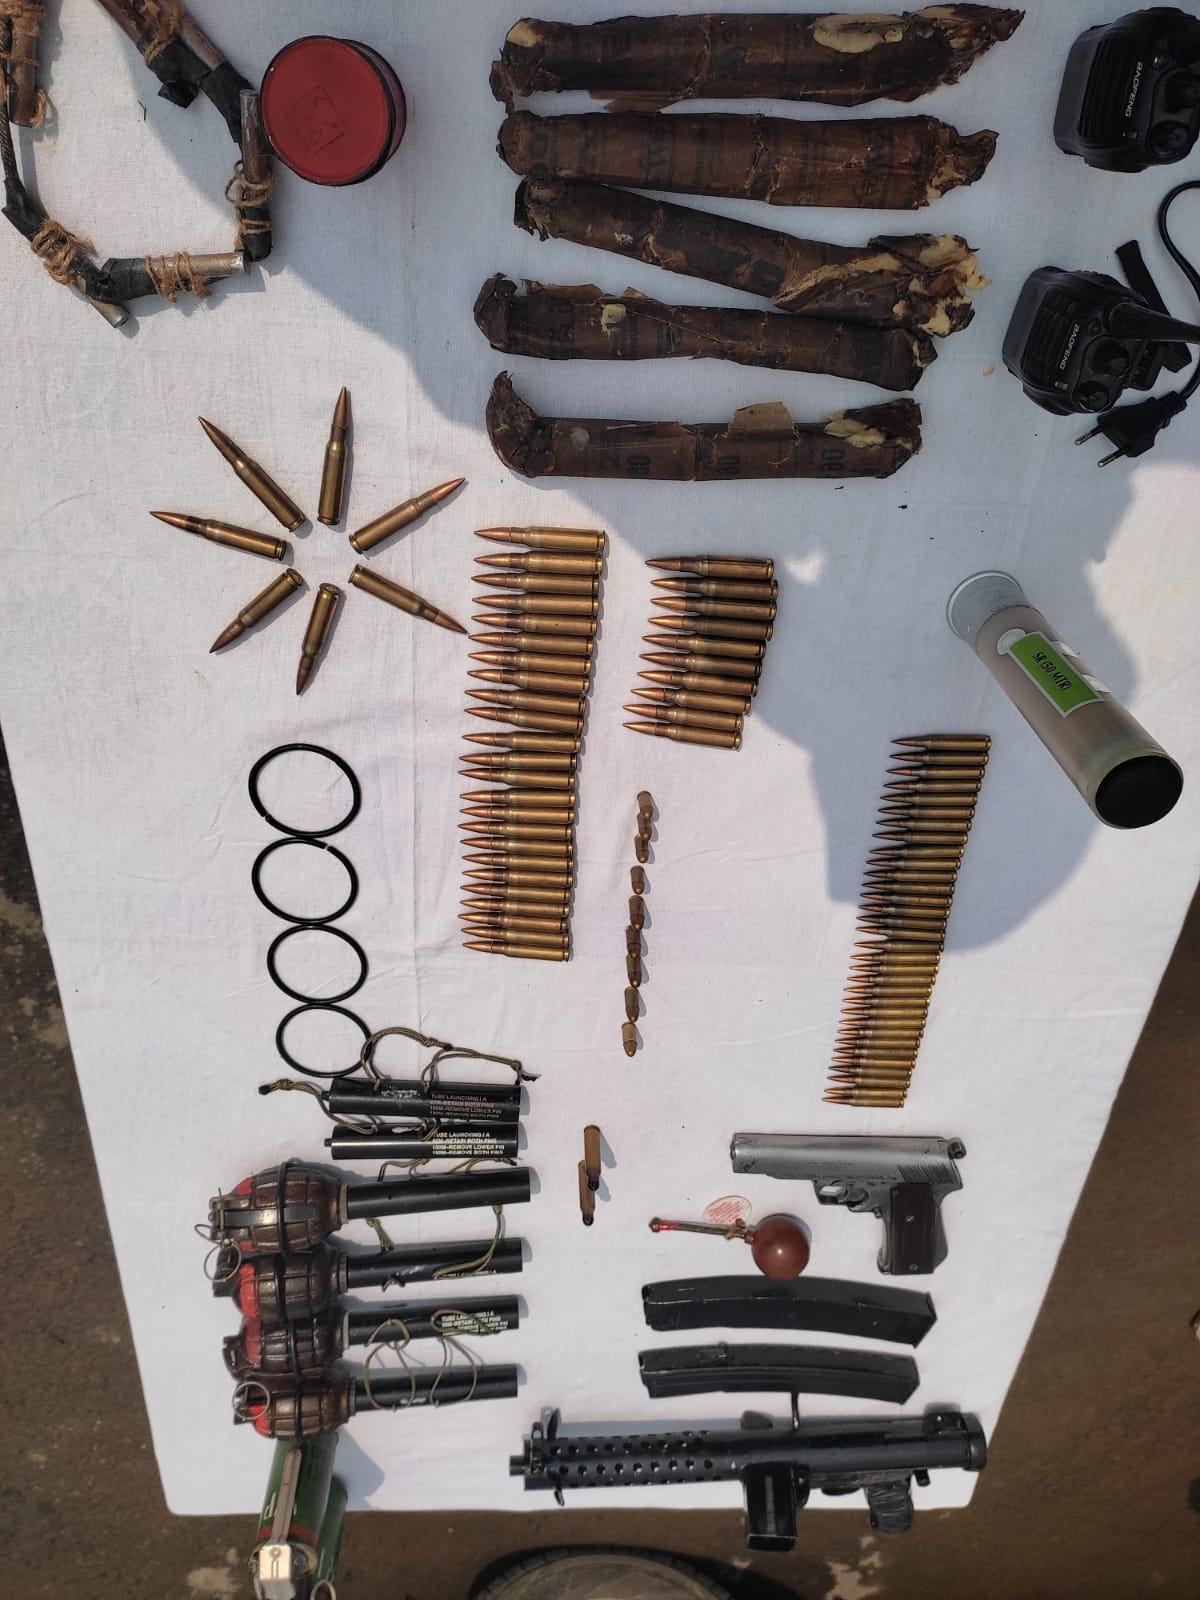 cache-of-weapons-explosive-materials-recovered-from-bishnupur-district